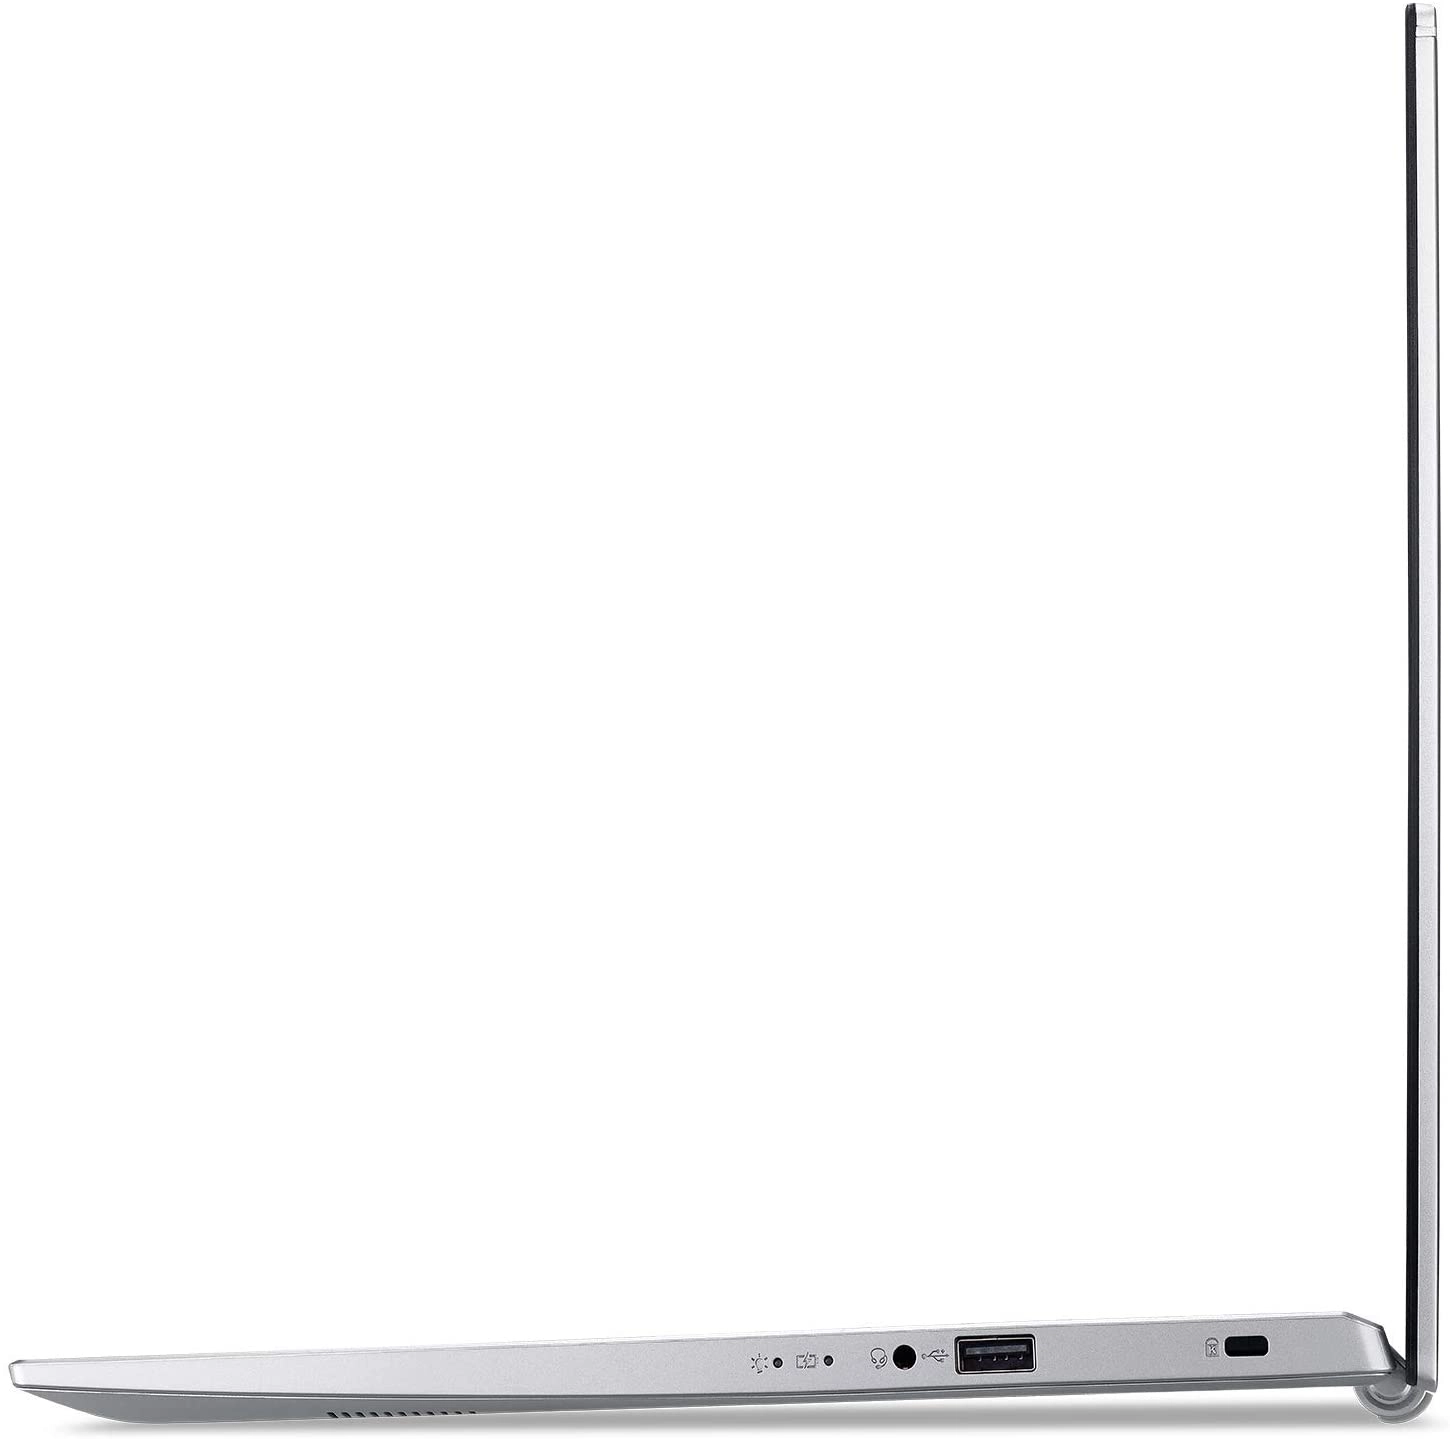 Acer A515-56-50RS laptop image